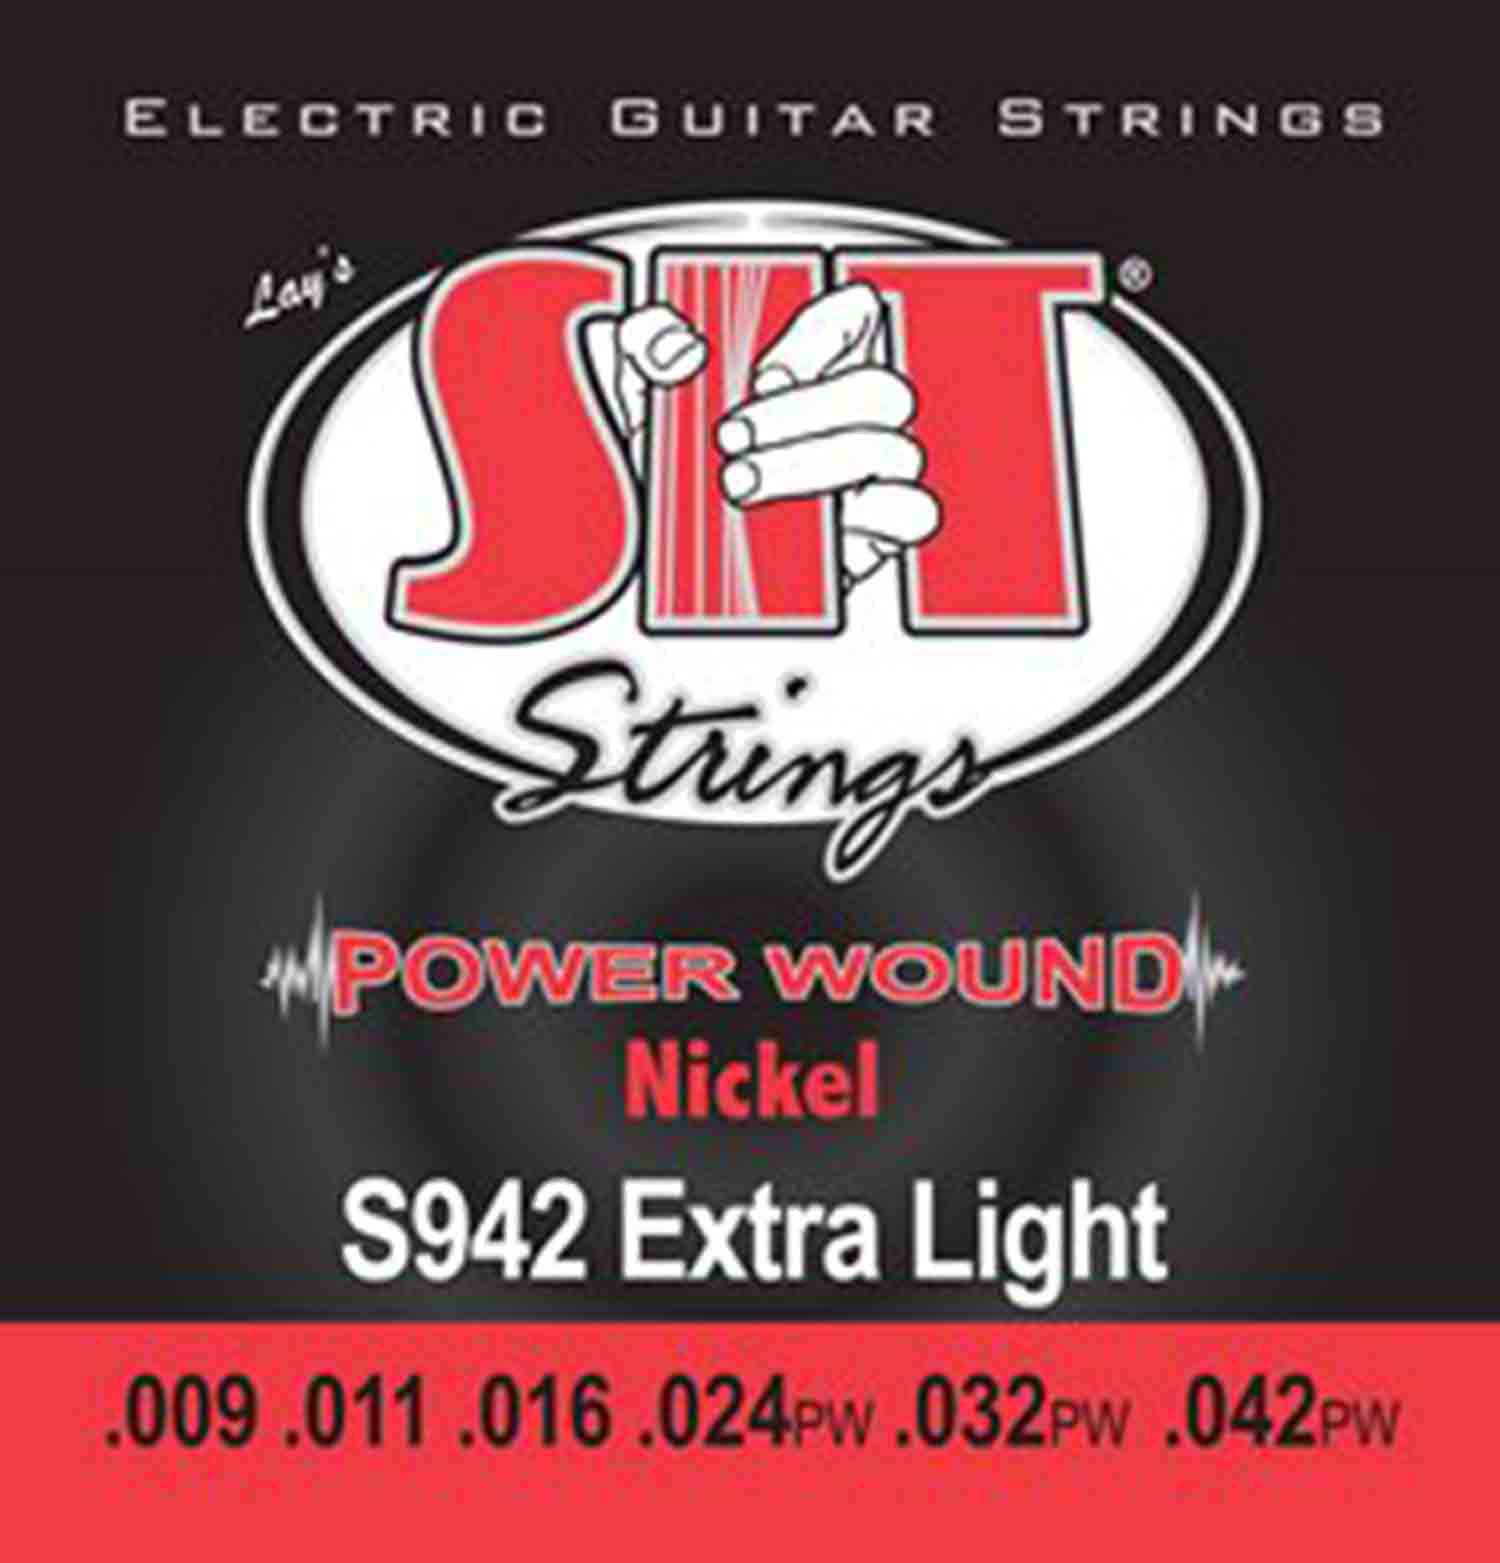 SIT Strings S942, Power Wound Nickel Electric Extra Light Electric Guitar String - Hollywood DJ